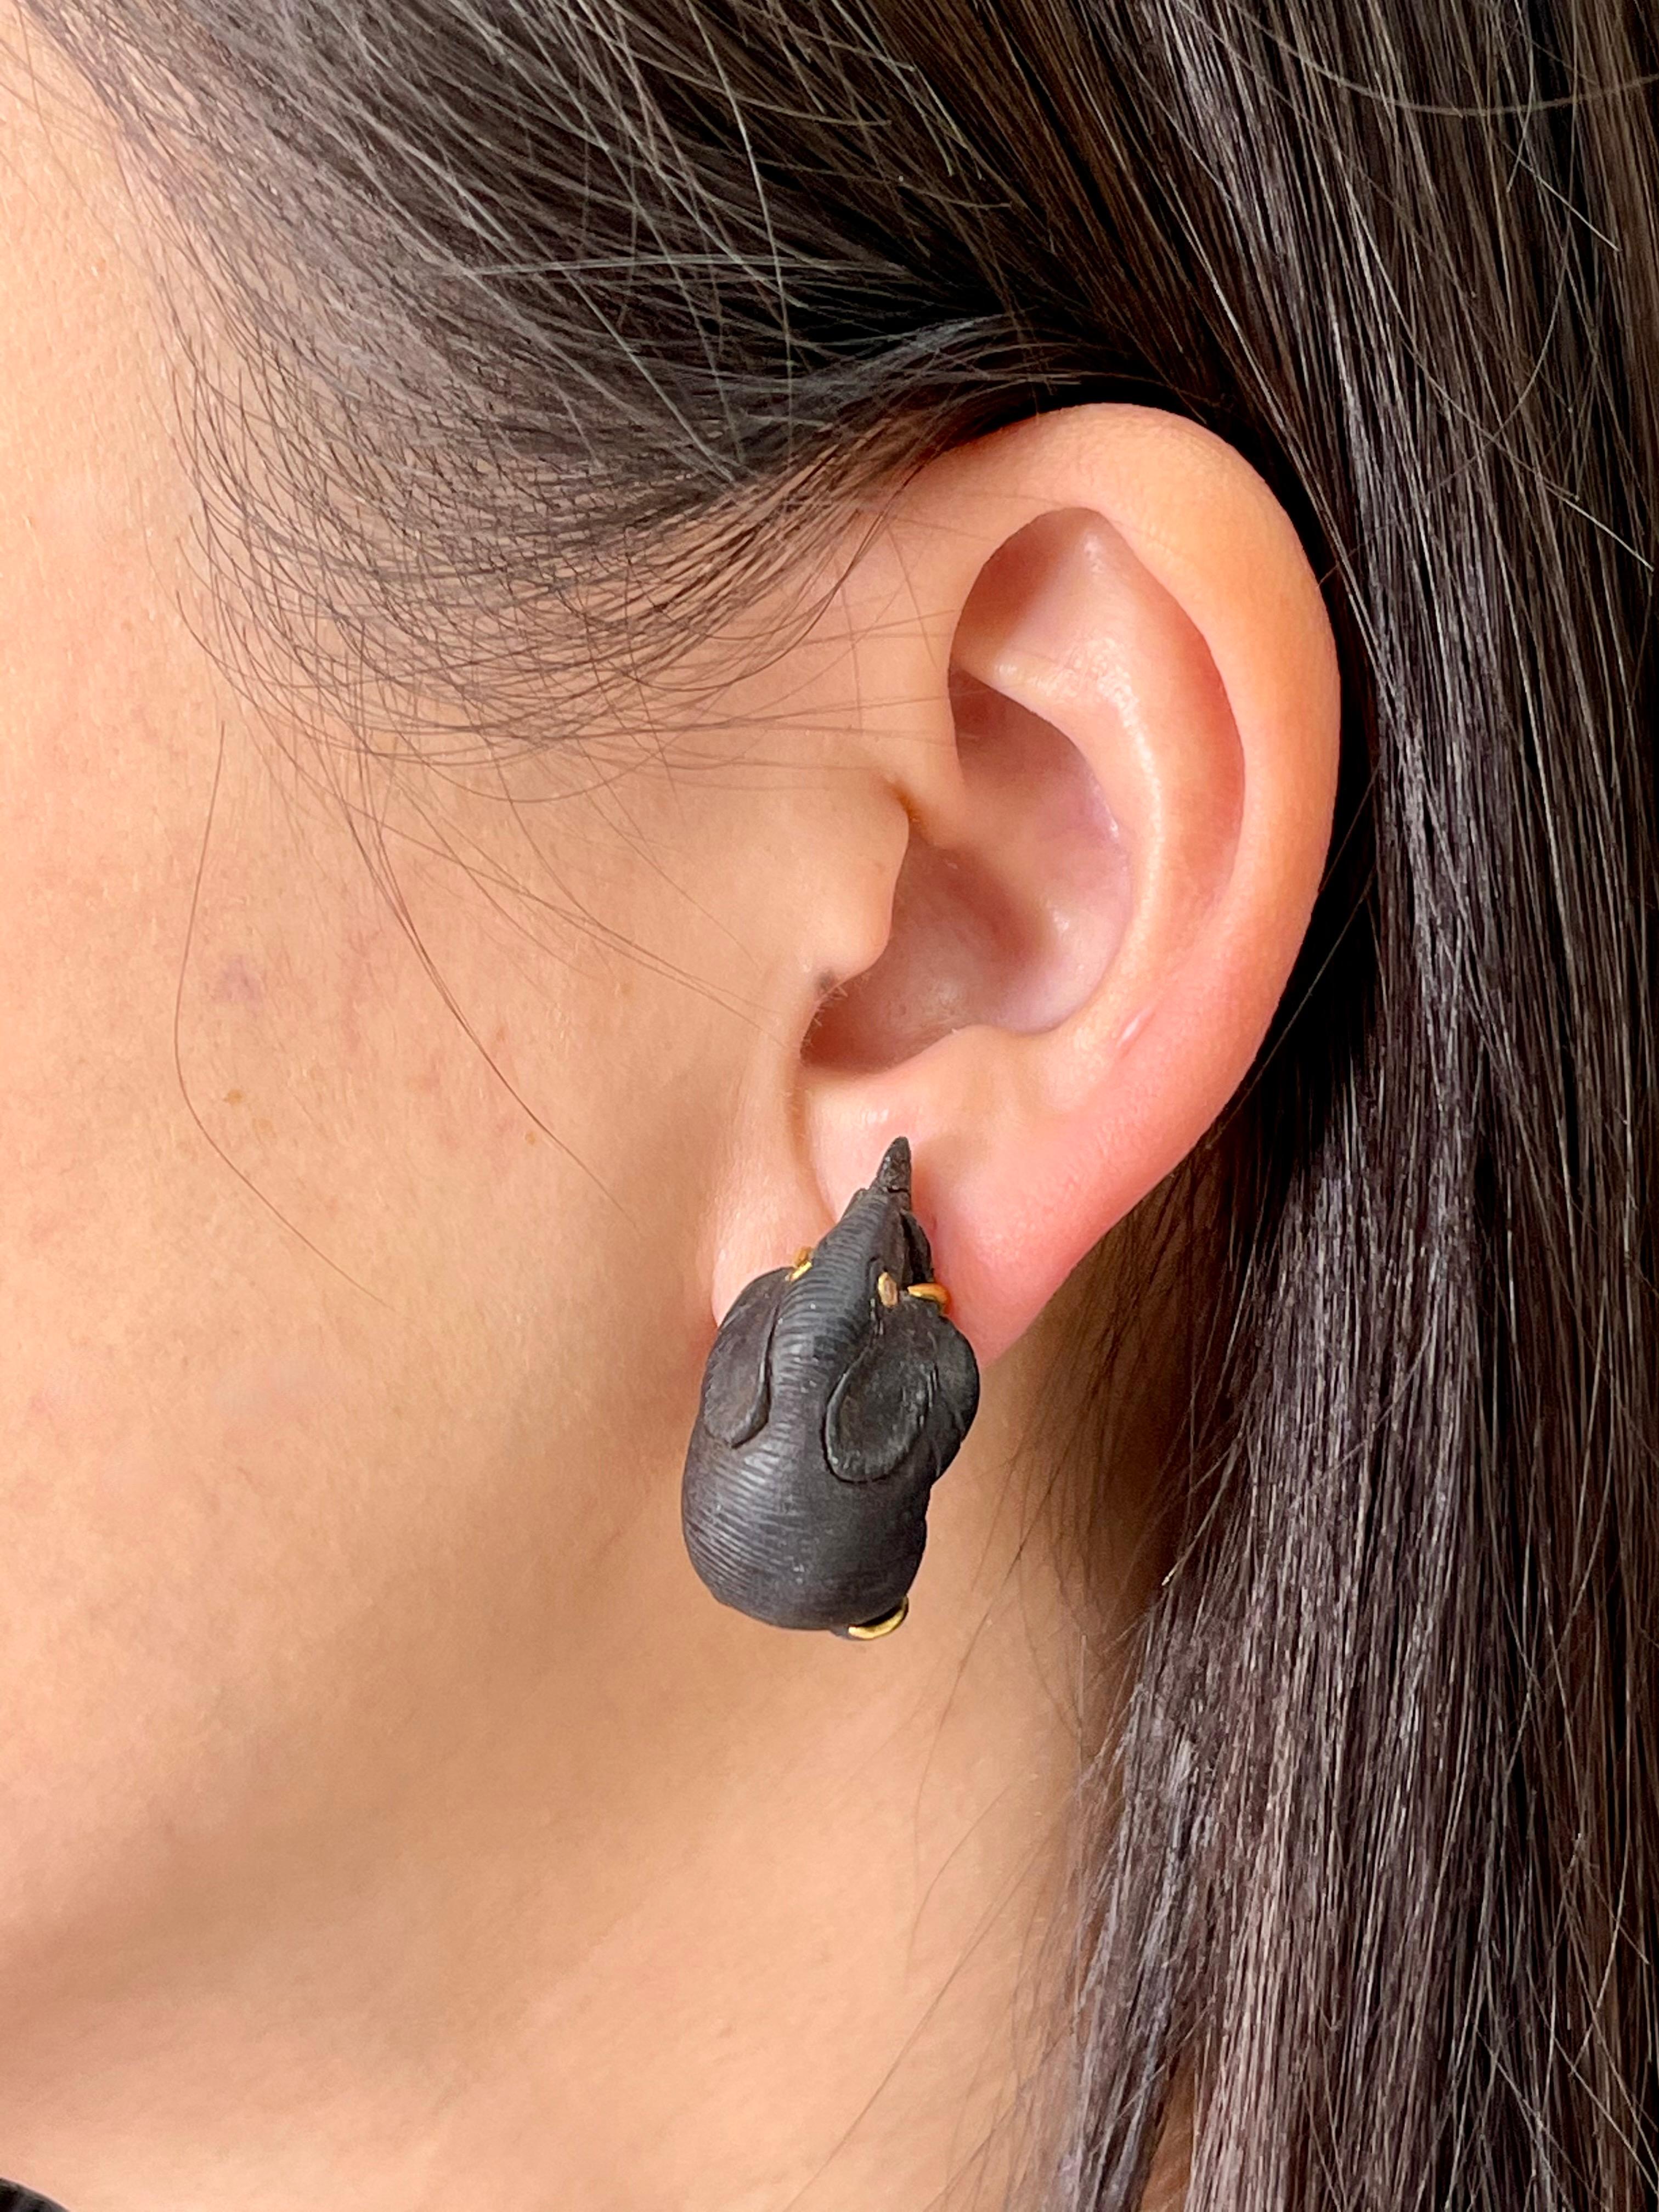 Please check out the HD video! This is a great statement piece. You will get lots of compliments! The vintage elephant earrings are realistic and full of life. Elephants are a traditional symbol of power and peace in Thailand. These earrings are